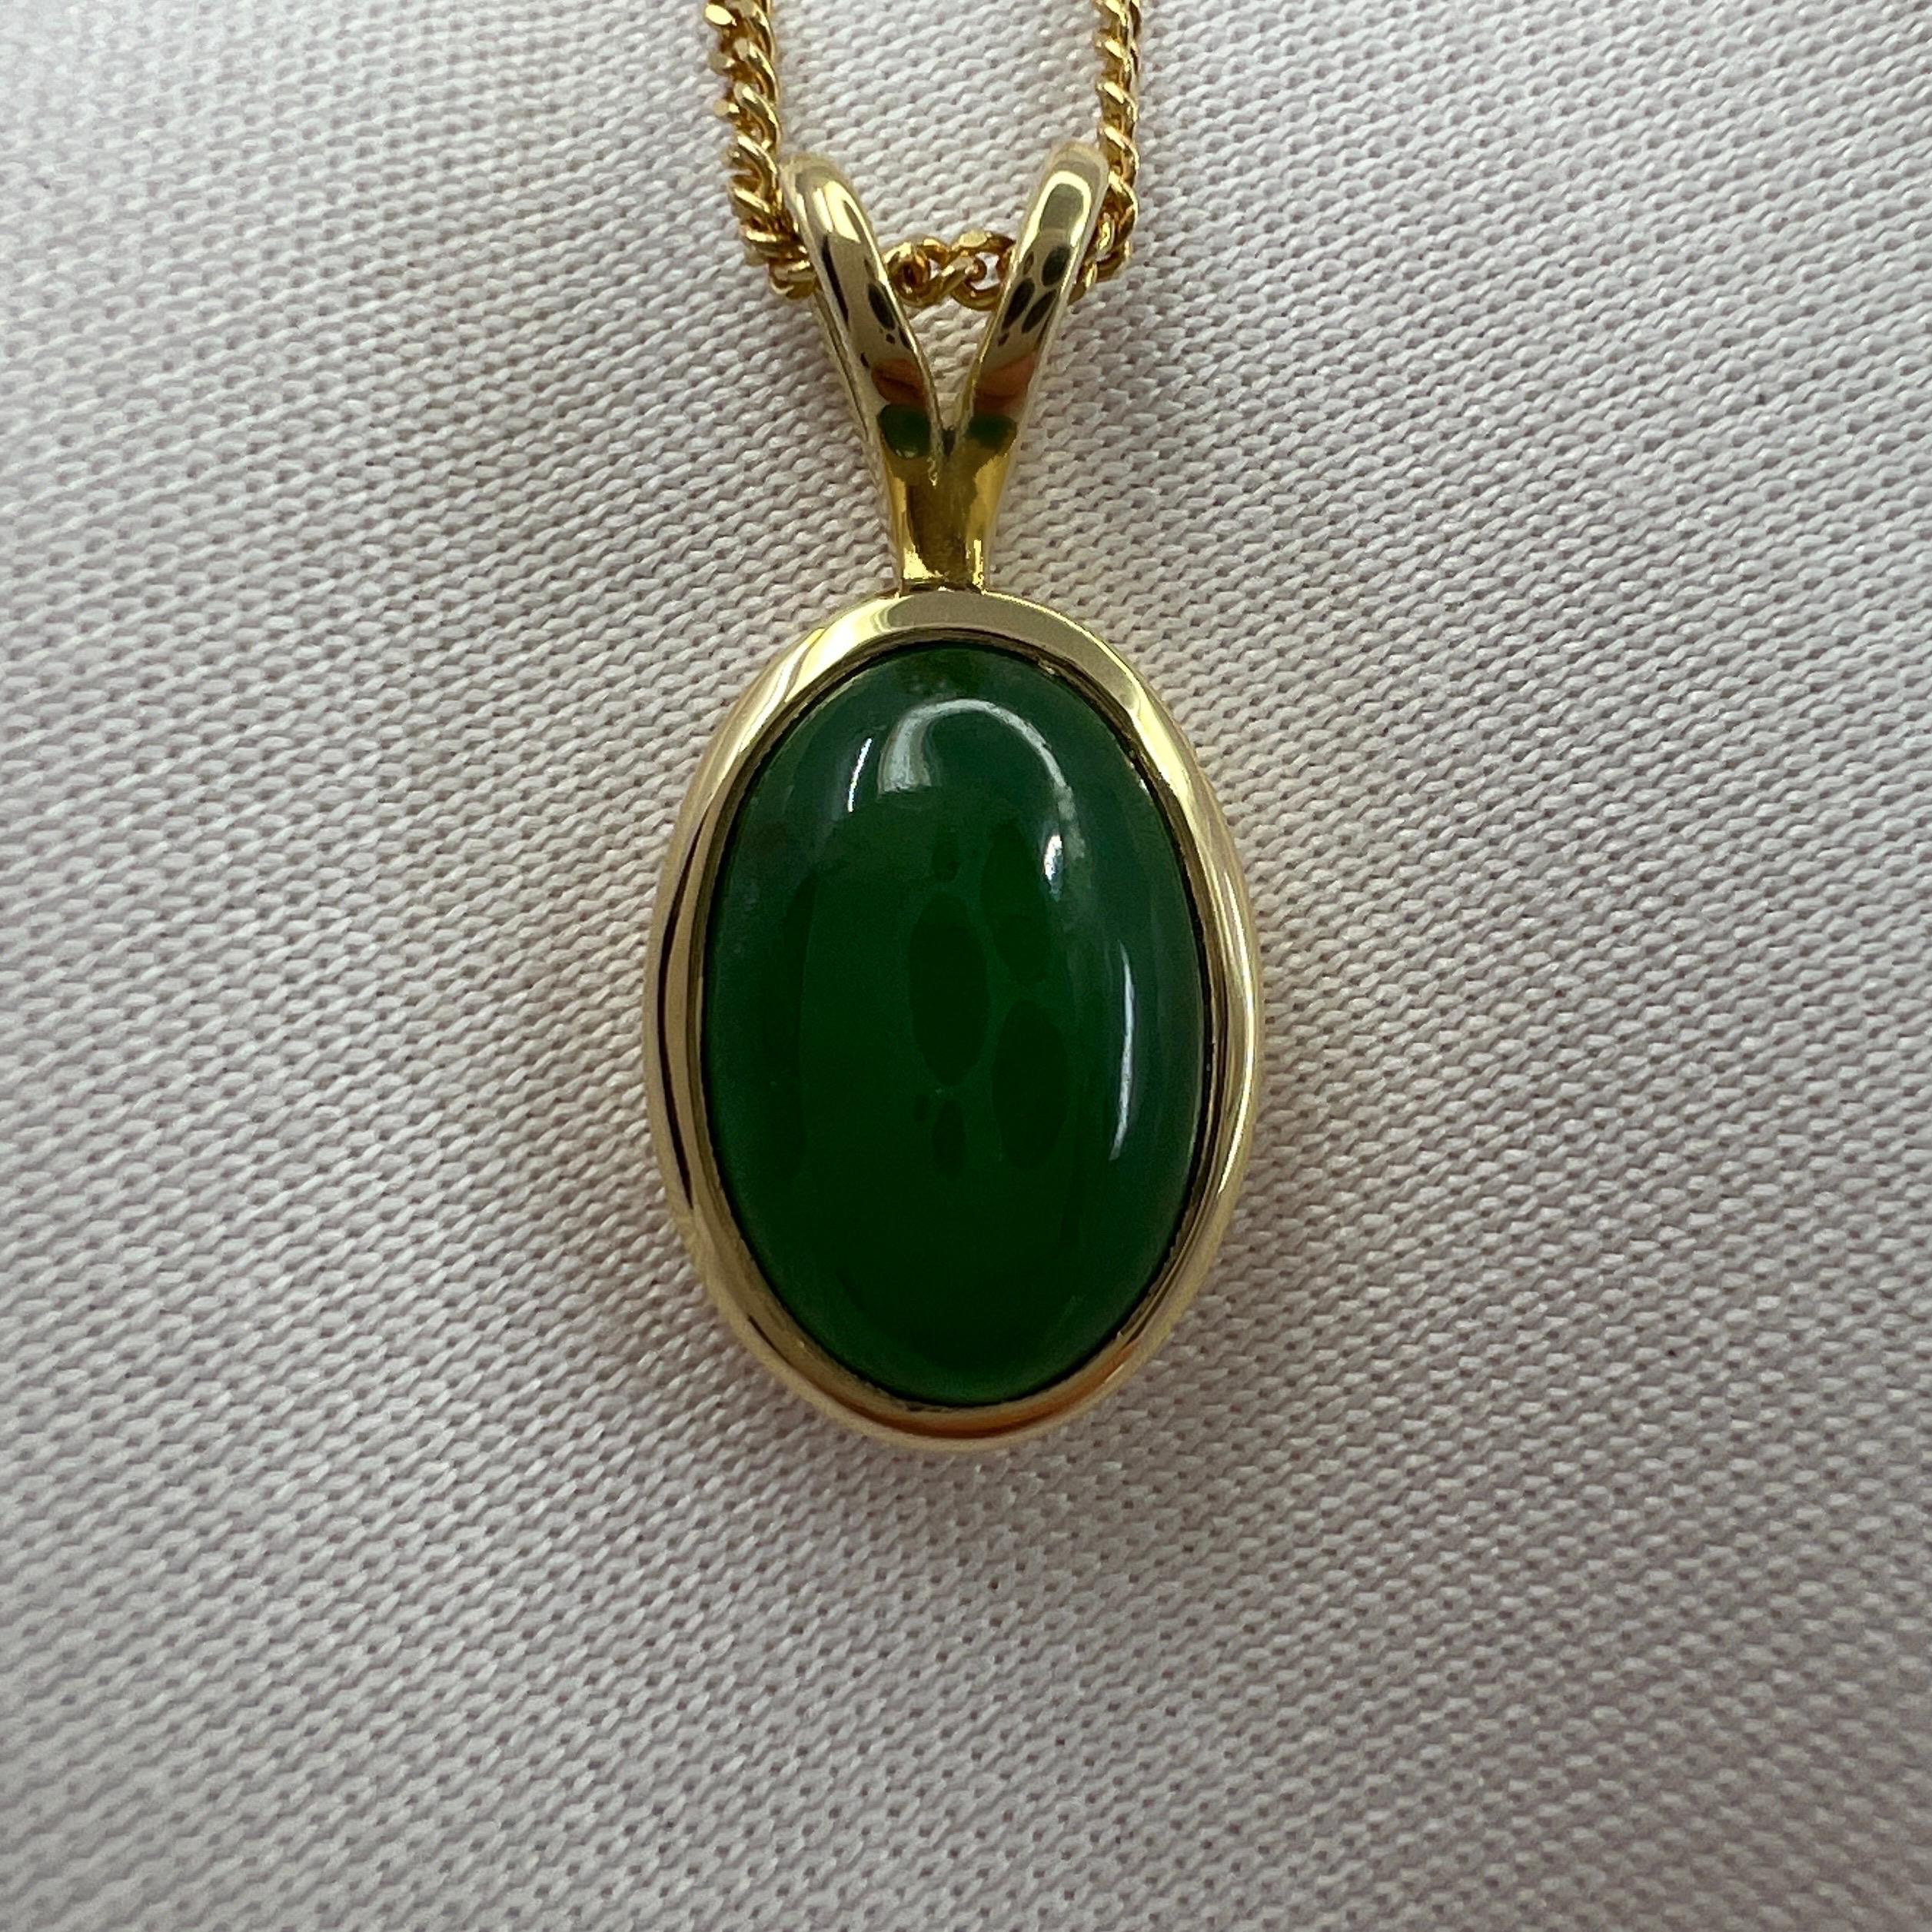 Rare GIA Certified Untreated Jadeite Jade A-Grade Green Pendant Necklace.

Fine 2.08 carat beautiful untreated jadeite stone with a fine green colour and excellent oval cabochon cut. 

Fully certified by GIA as natural colour, no impregnation and A